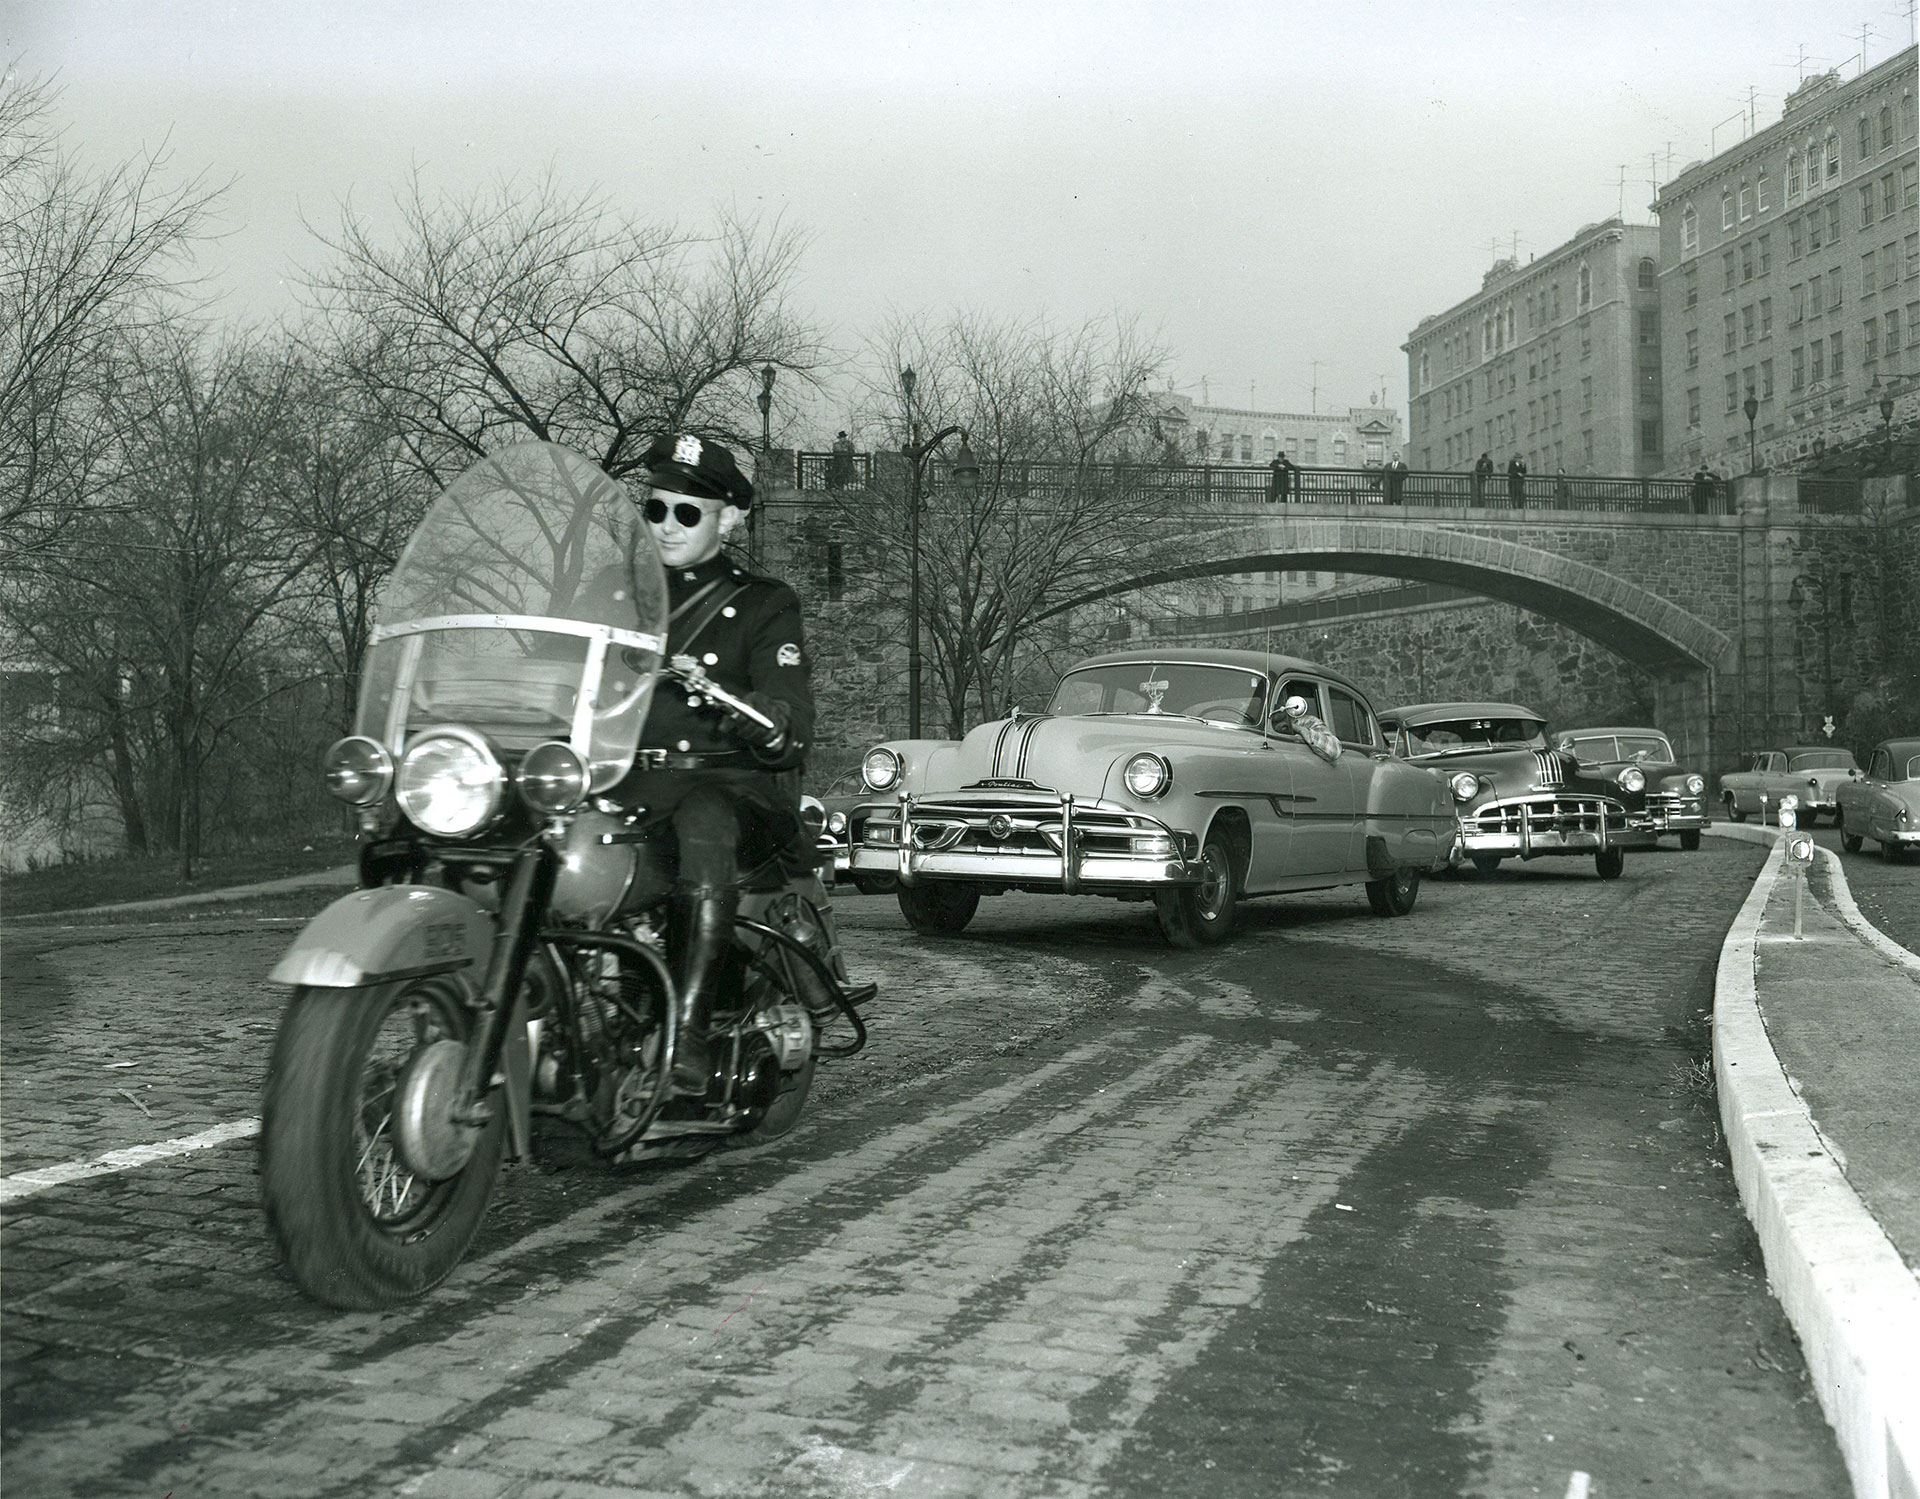 PAPD Motorcycle Officer from the 1940s